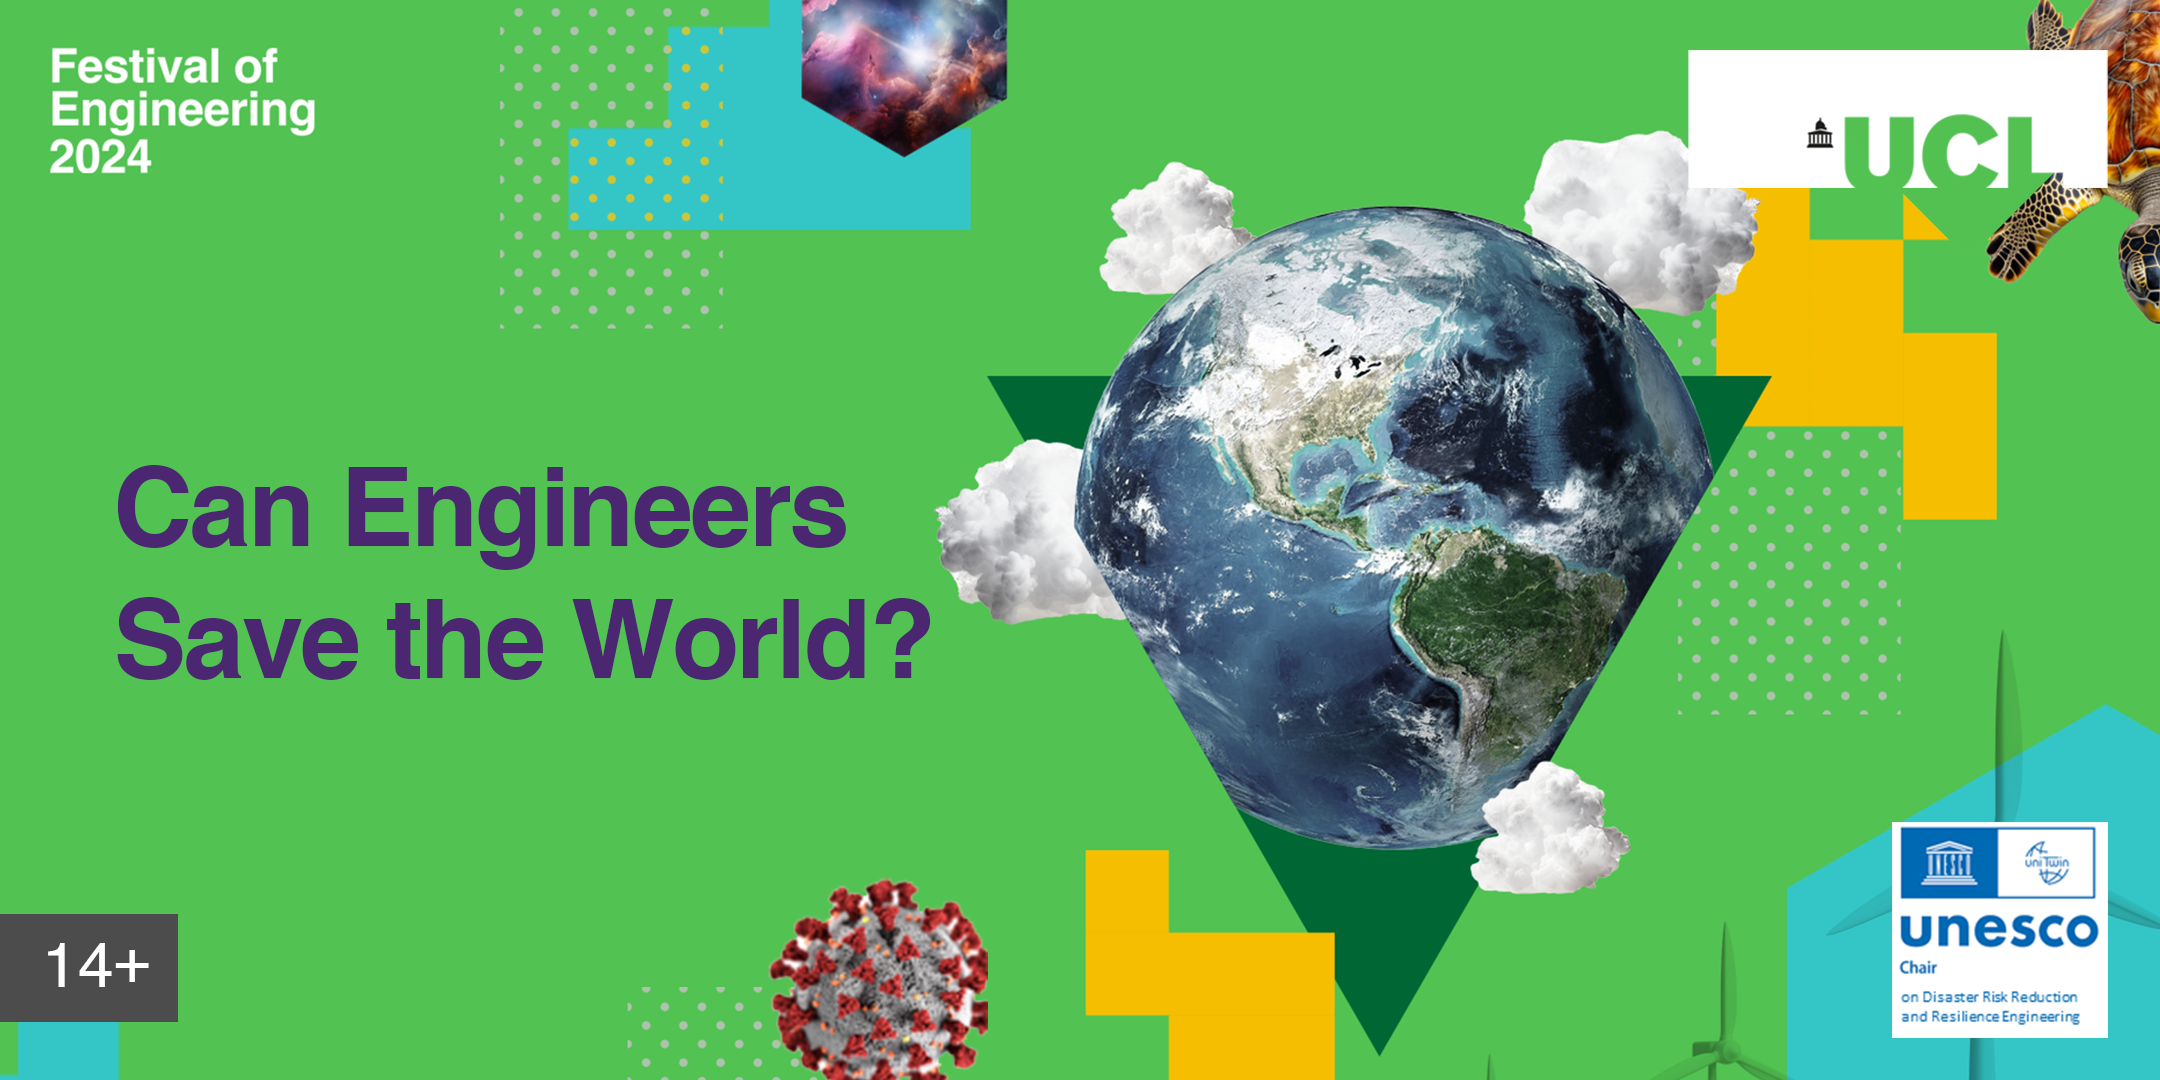 Festival of Engineering 2024. Can Engineers save the world? UCL logo top right. A series of images collaged on a green background. Images include the earth, clouds and a virus.